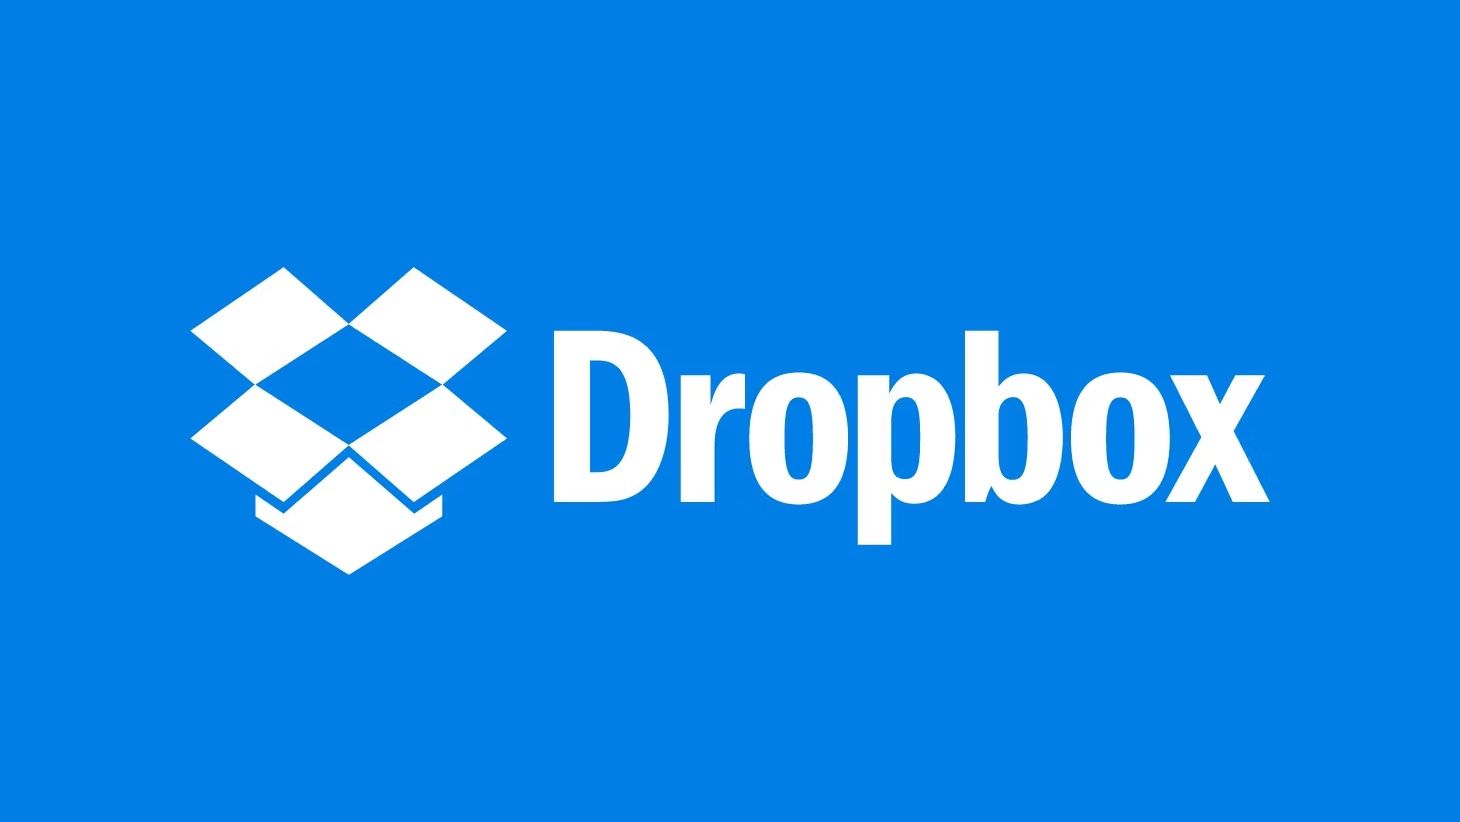 THe Dropbox logo against a blue background